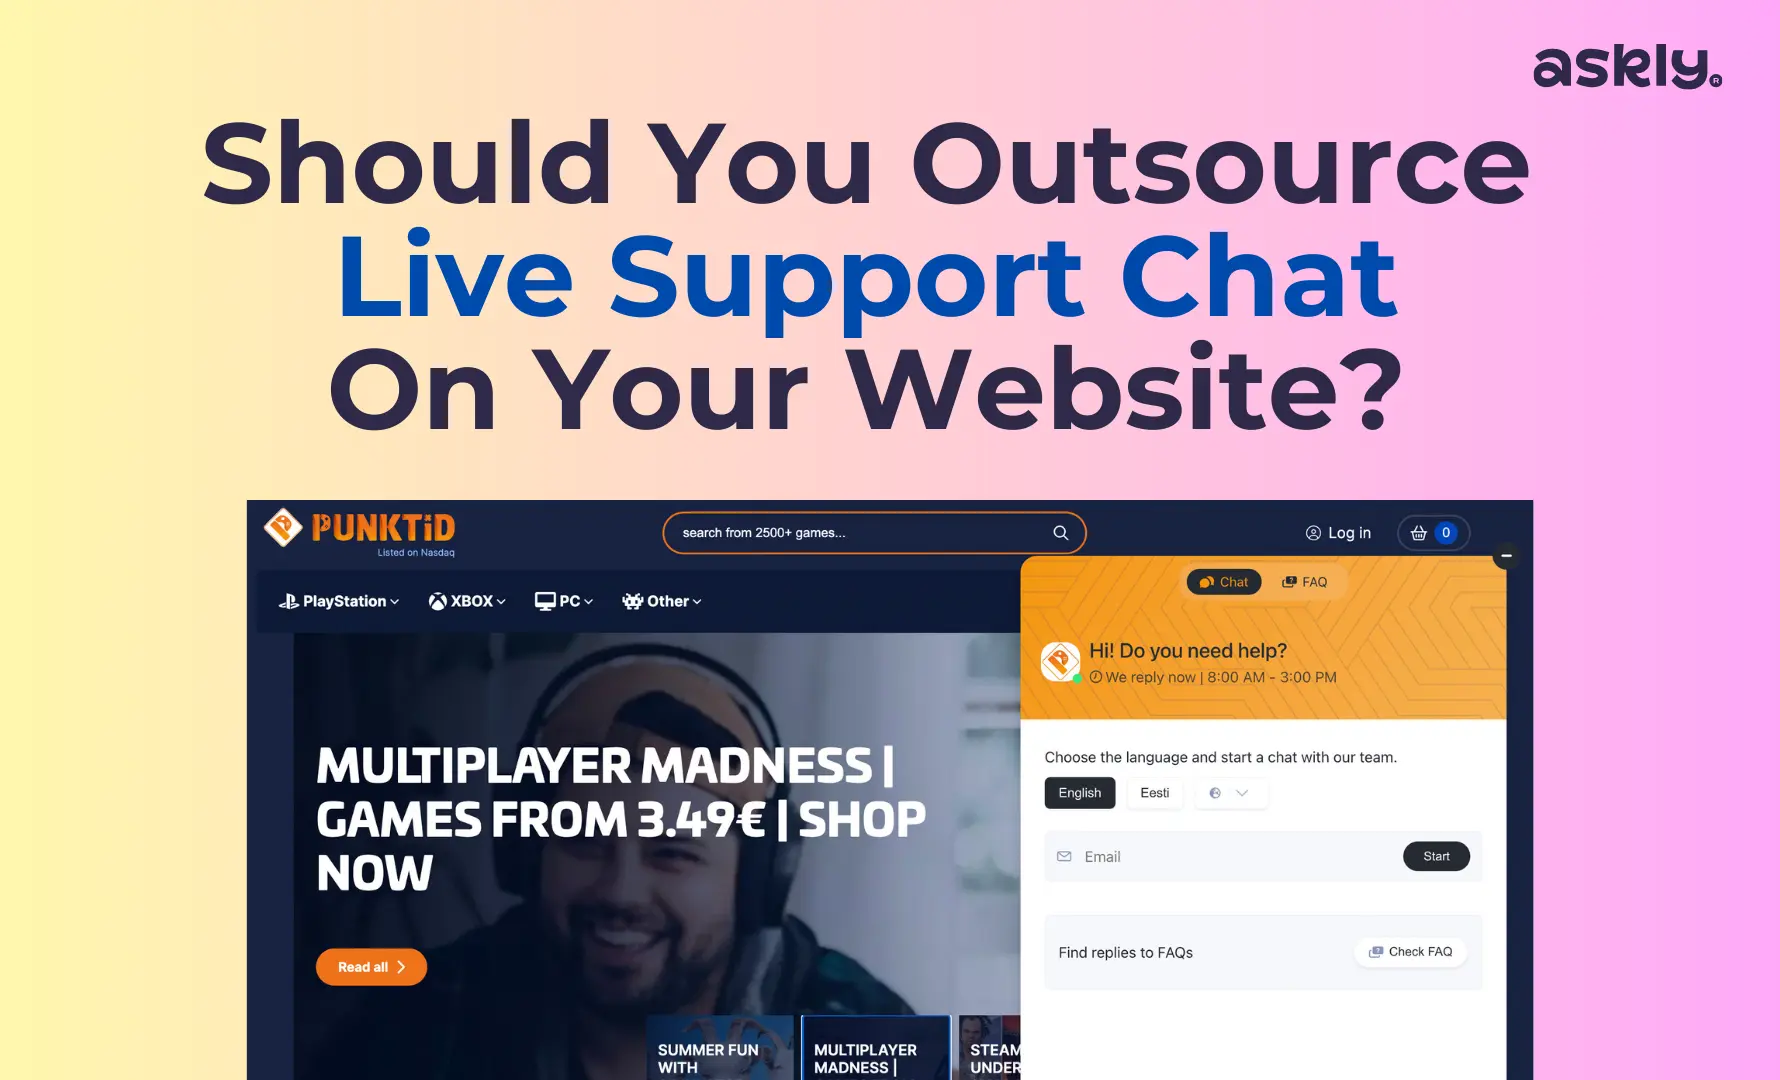 Should You Outsource The Live Support Chat On Your Website?